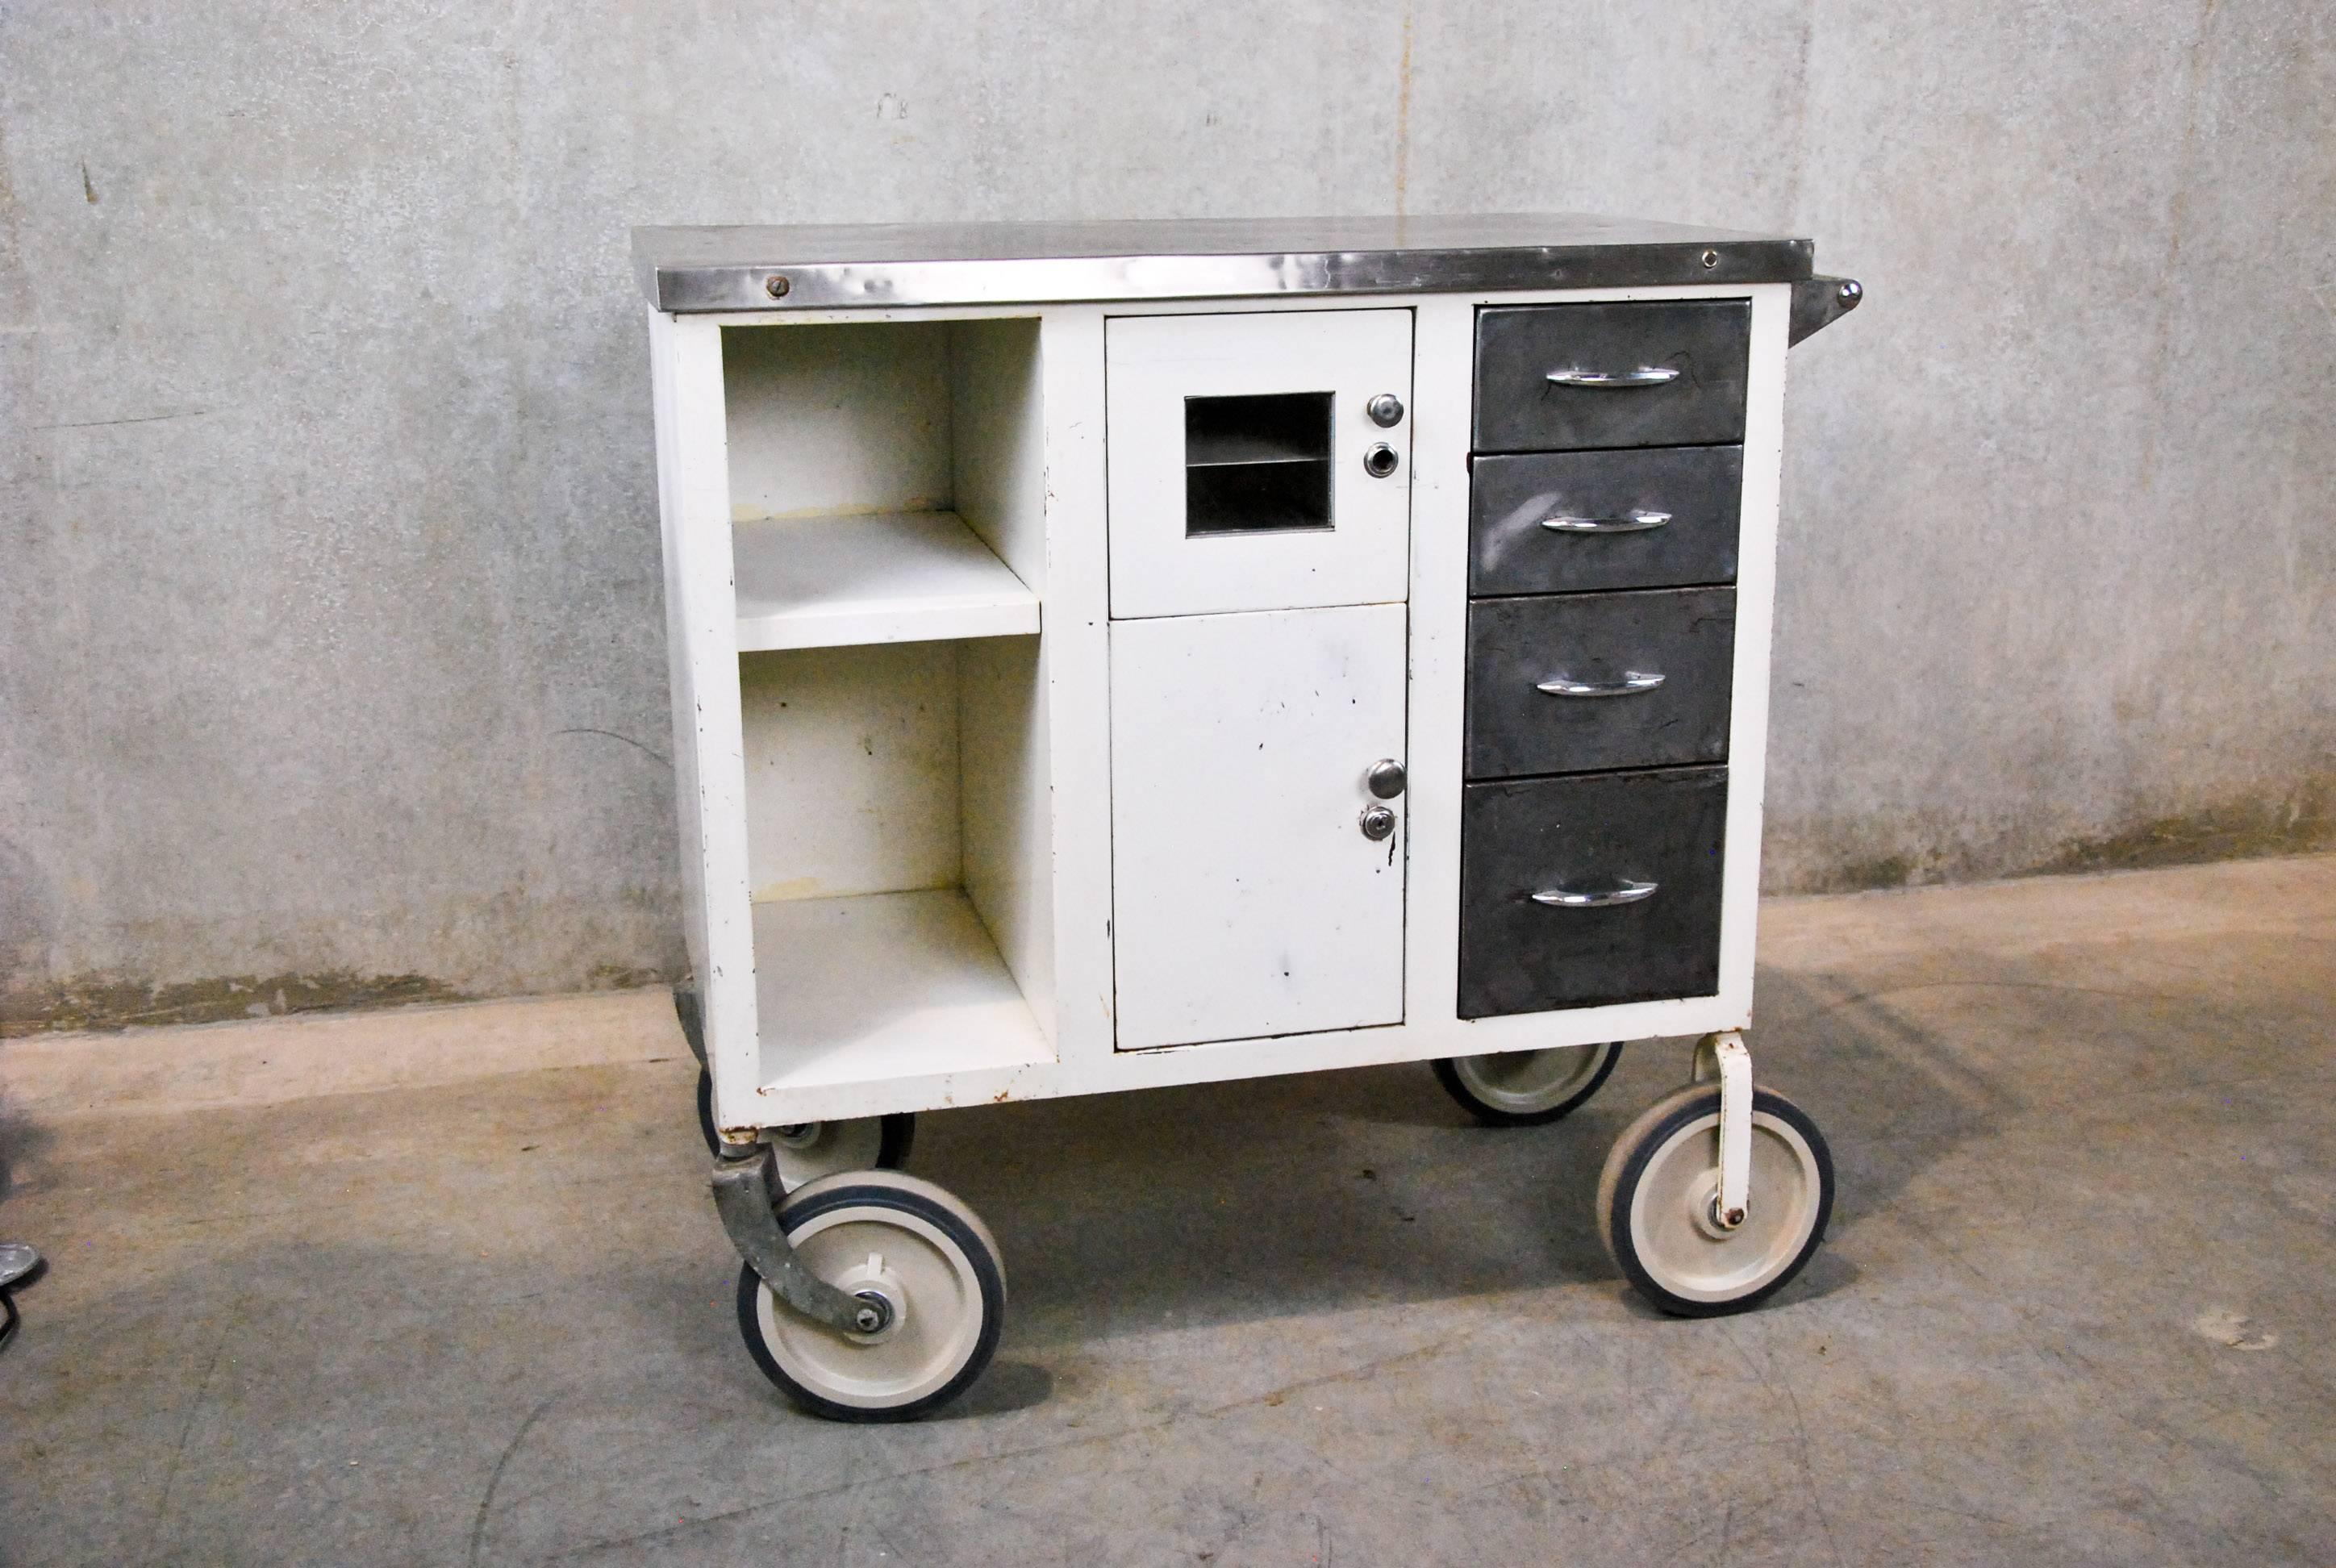 This 1920s-era metal industrial cart was found in a factory near Seattle. It features a stainless steel top and cushioned wheels, suggesting that it was likely a medical cart at some point. Today, its functional drawers, doors, and compartments